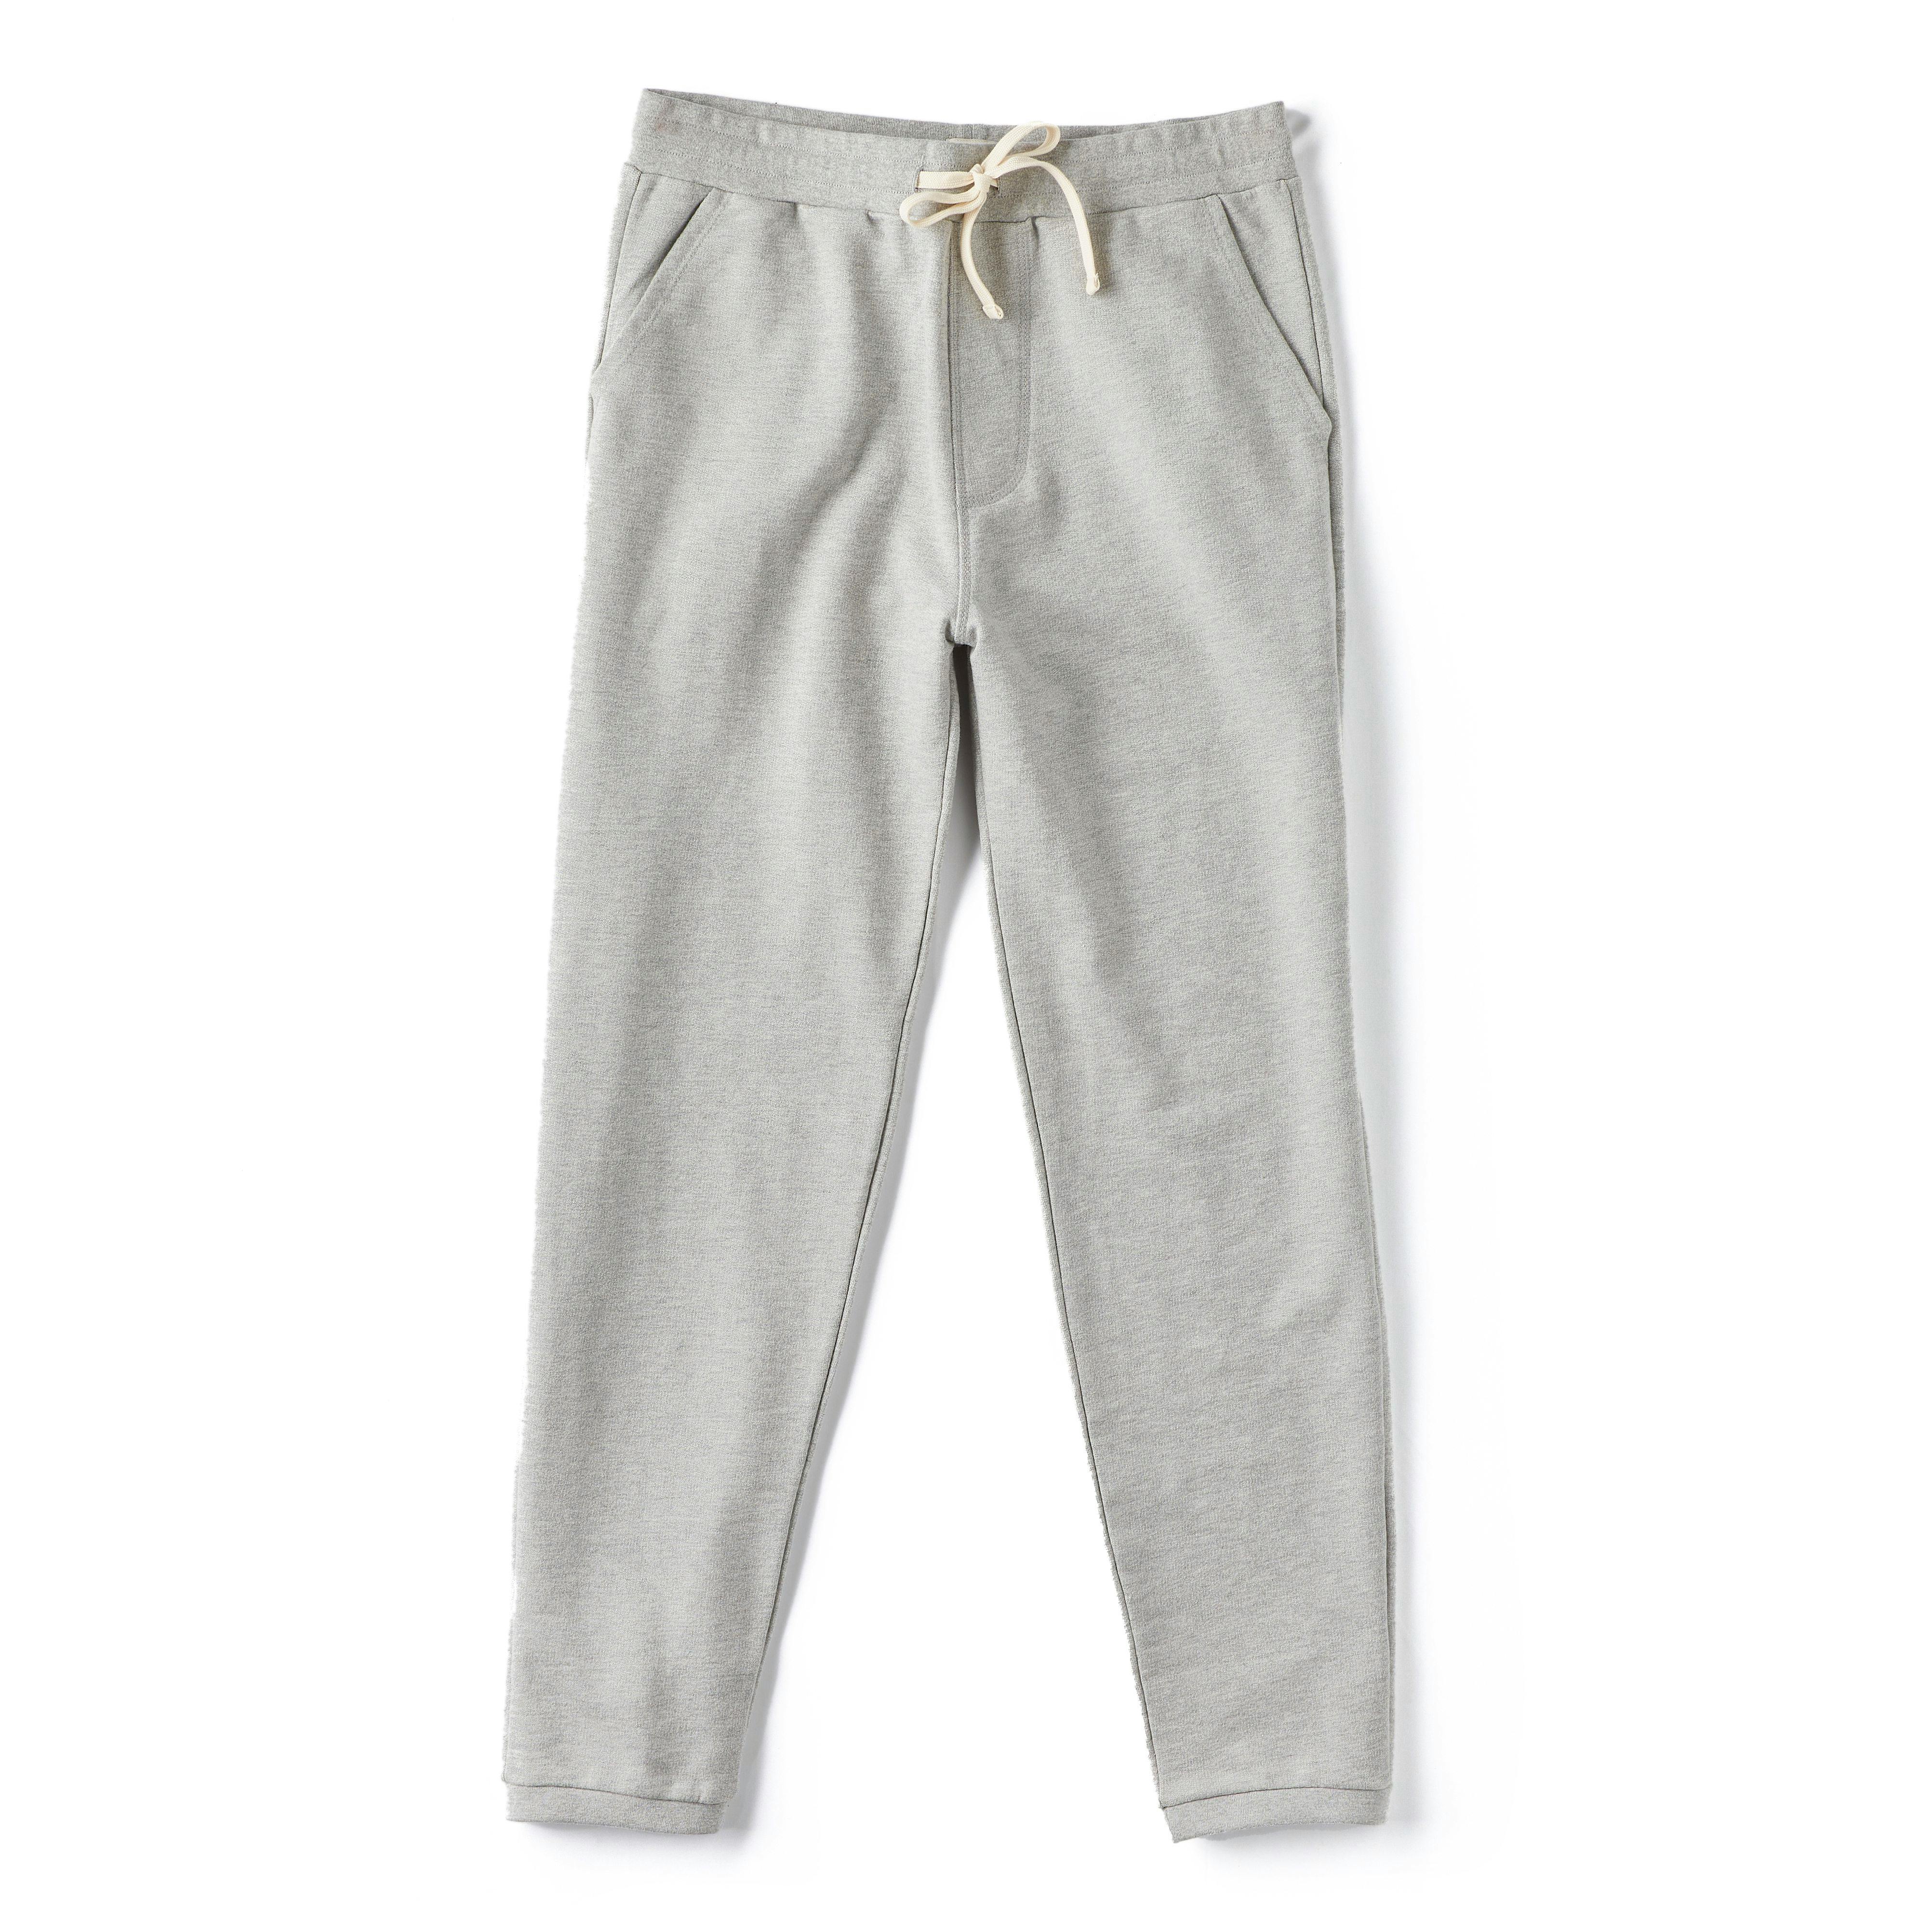 Flint and Tinder French Terry Sweatpant - Heather Grey